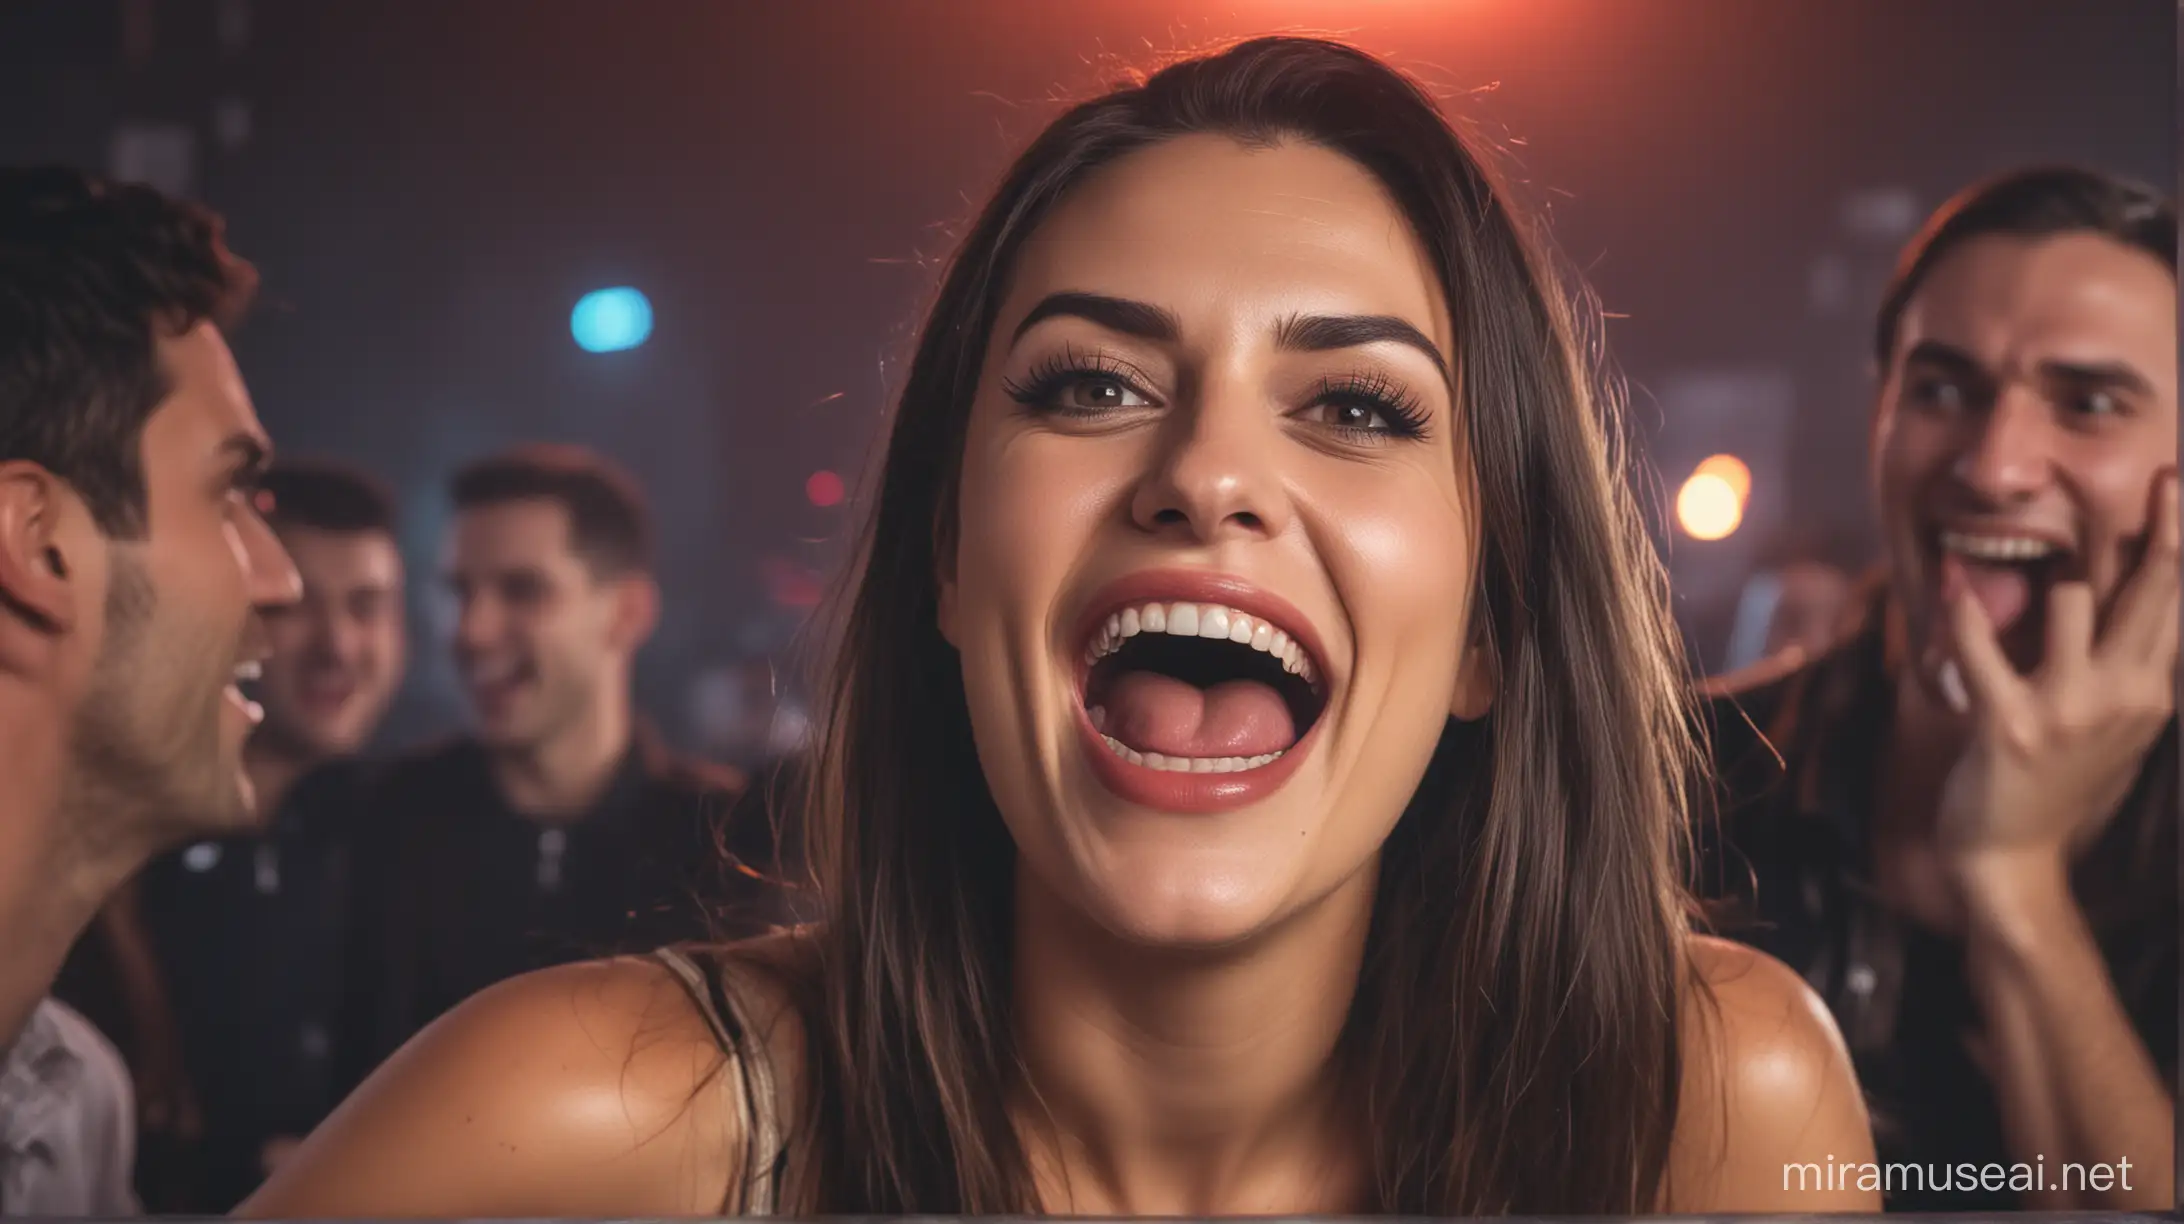 Sultry Woman Revels in Sinister Delight at Nightclub